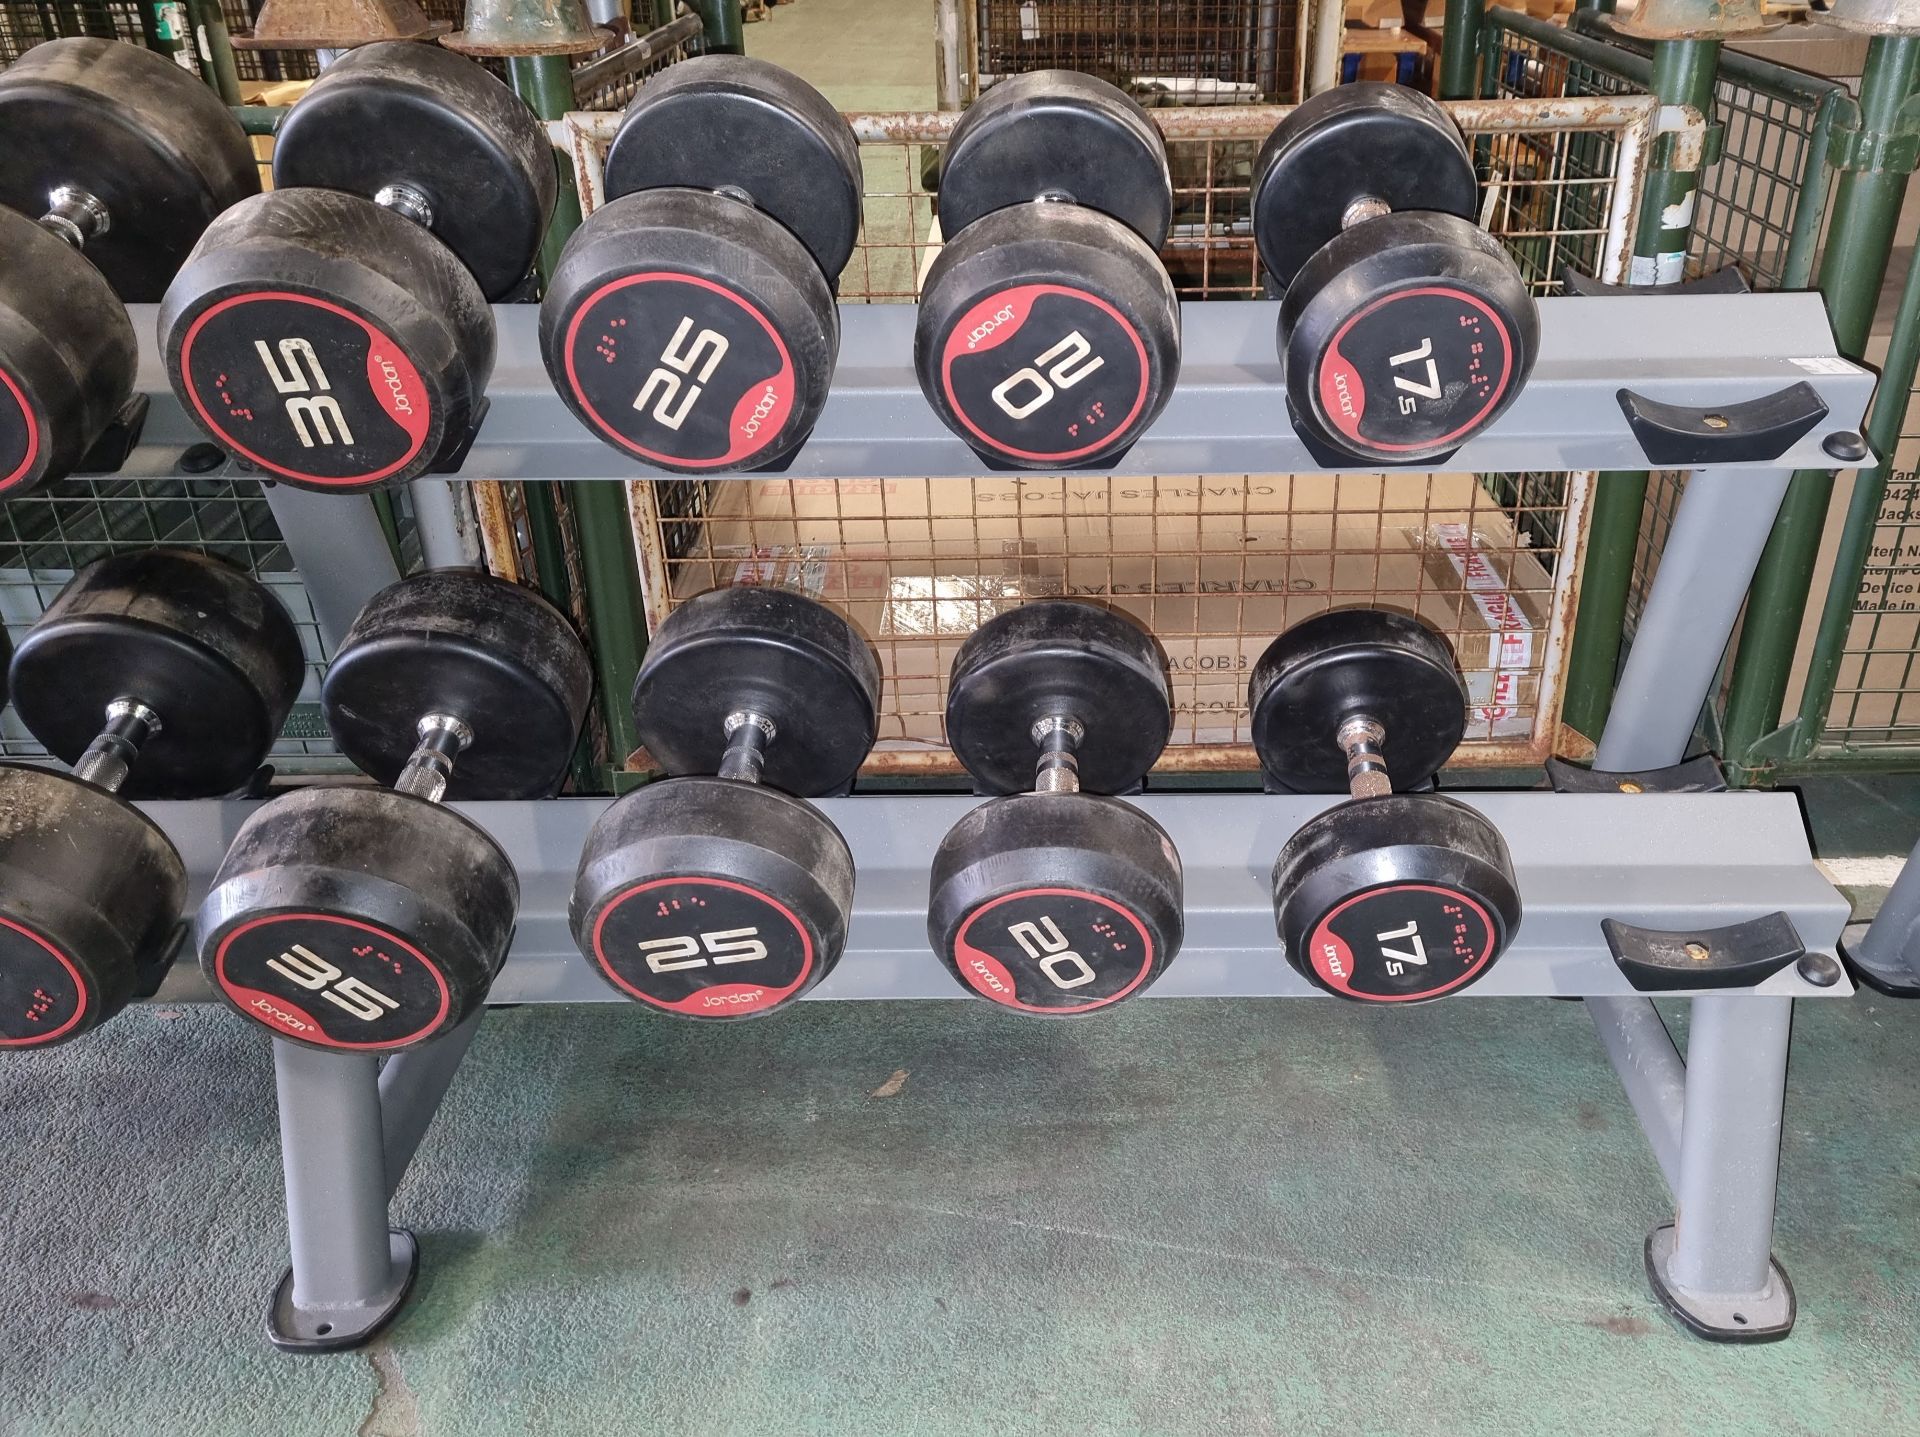 Jordan dumbell weight rack with weights 2.5kg to 50kg - see pictures - Image 3 of 12